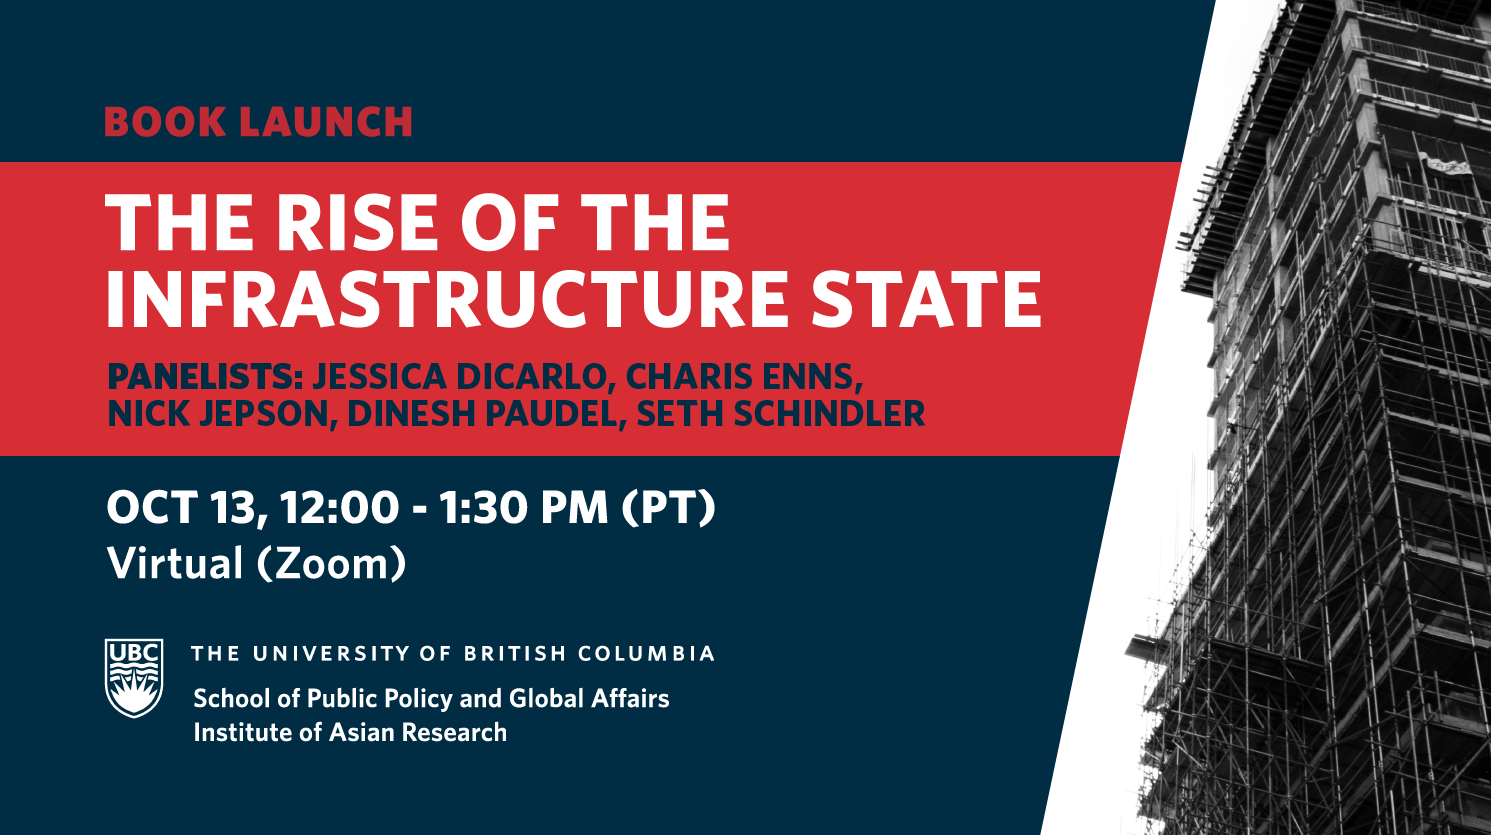 Promotional graphic for a book launch event on The Rise of the Infrastructure State